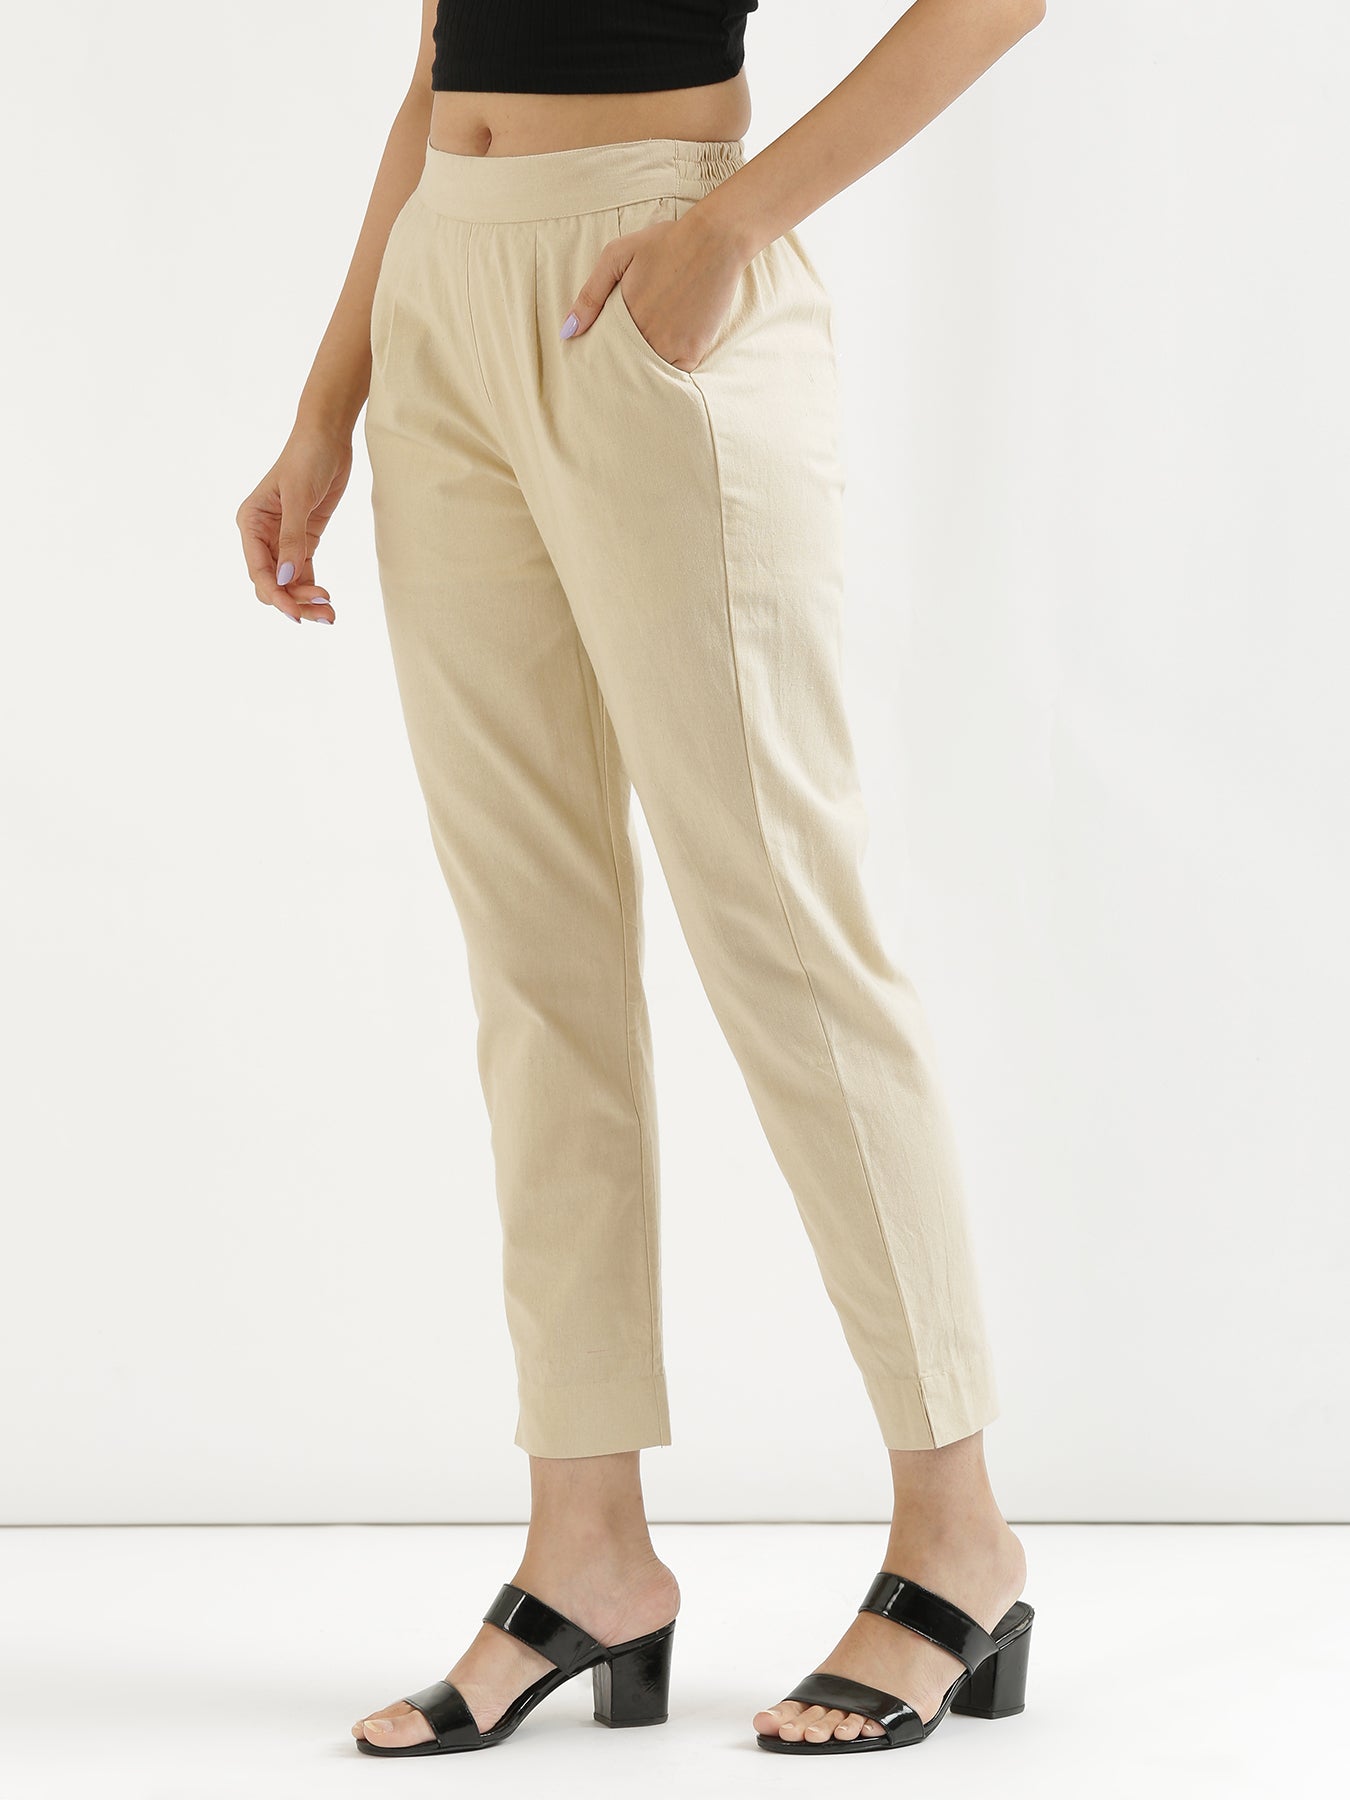 Linen Cotton Pants for Summer - Lilly Style | Linen pants women, Linen pants  outfit, Linen pants outfit summer